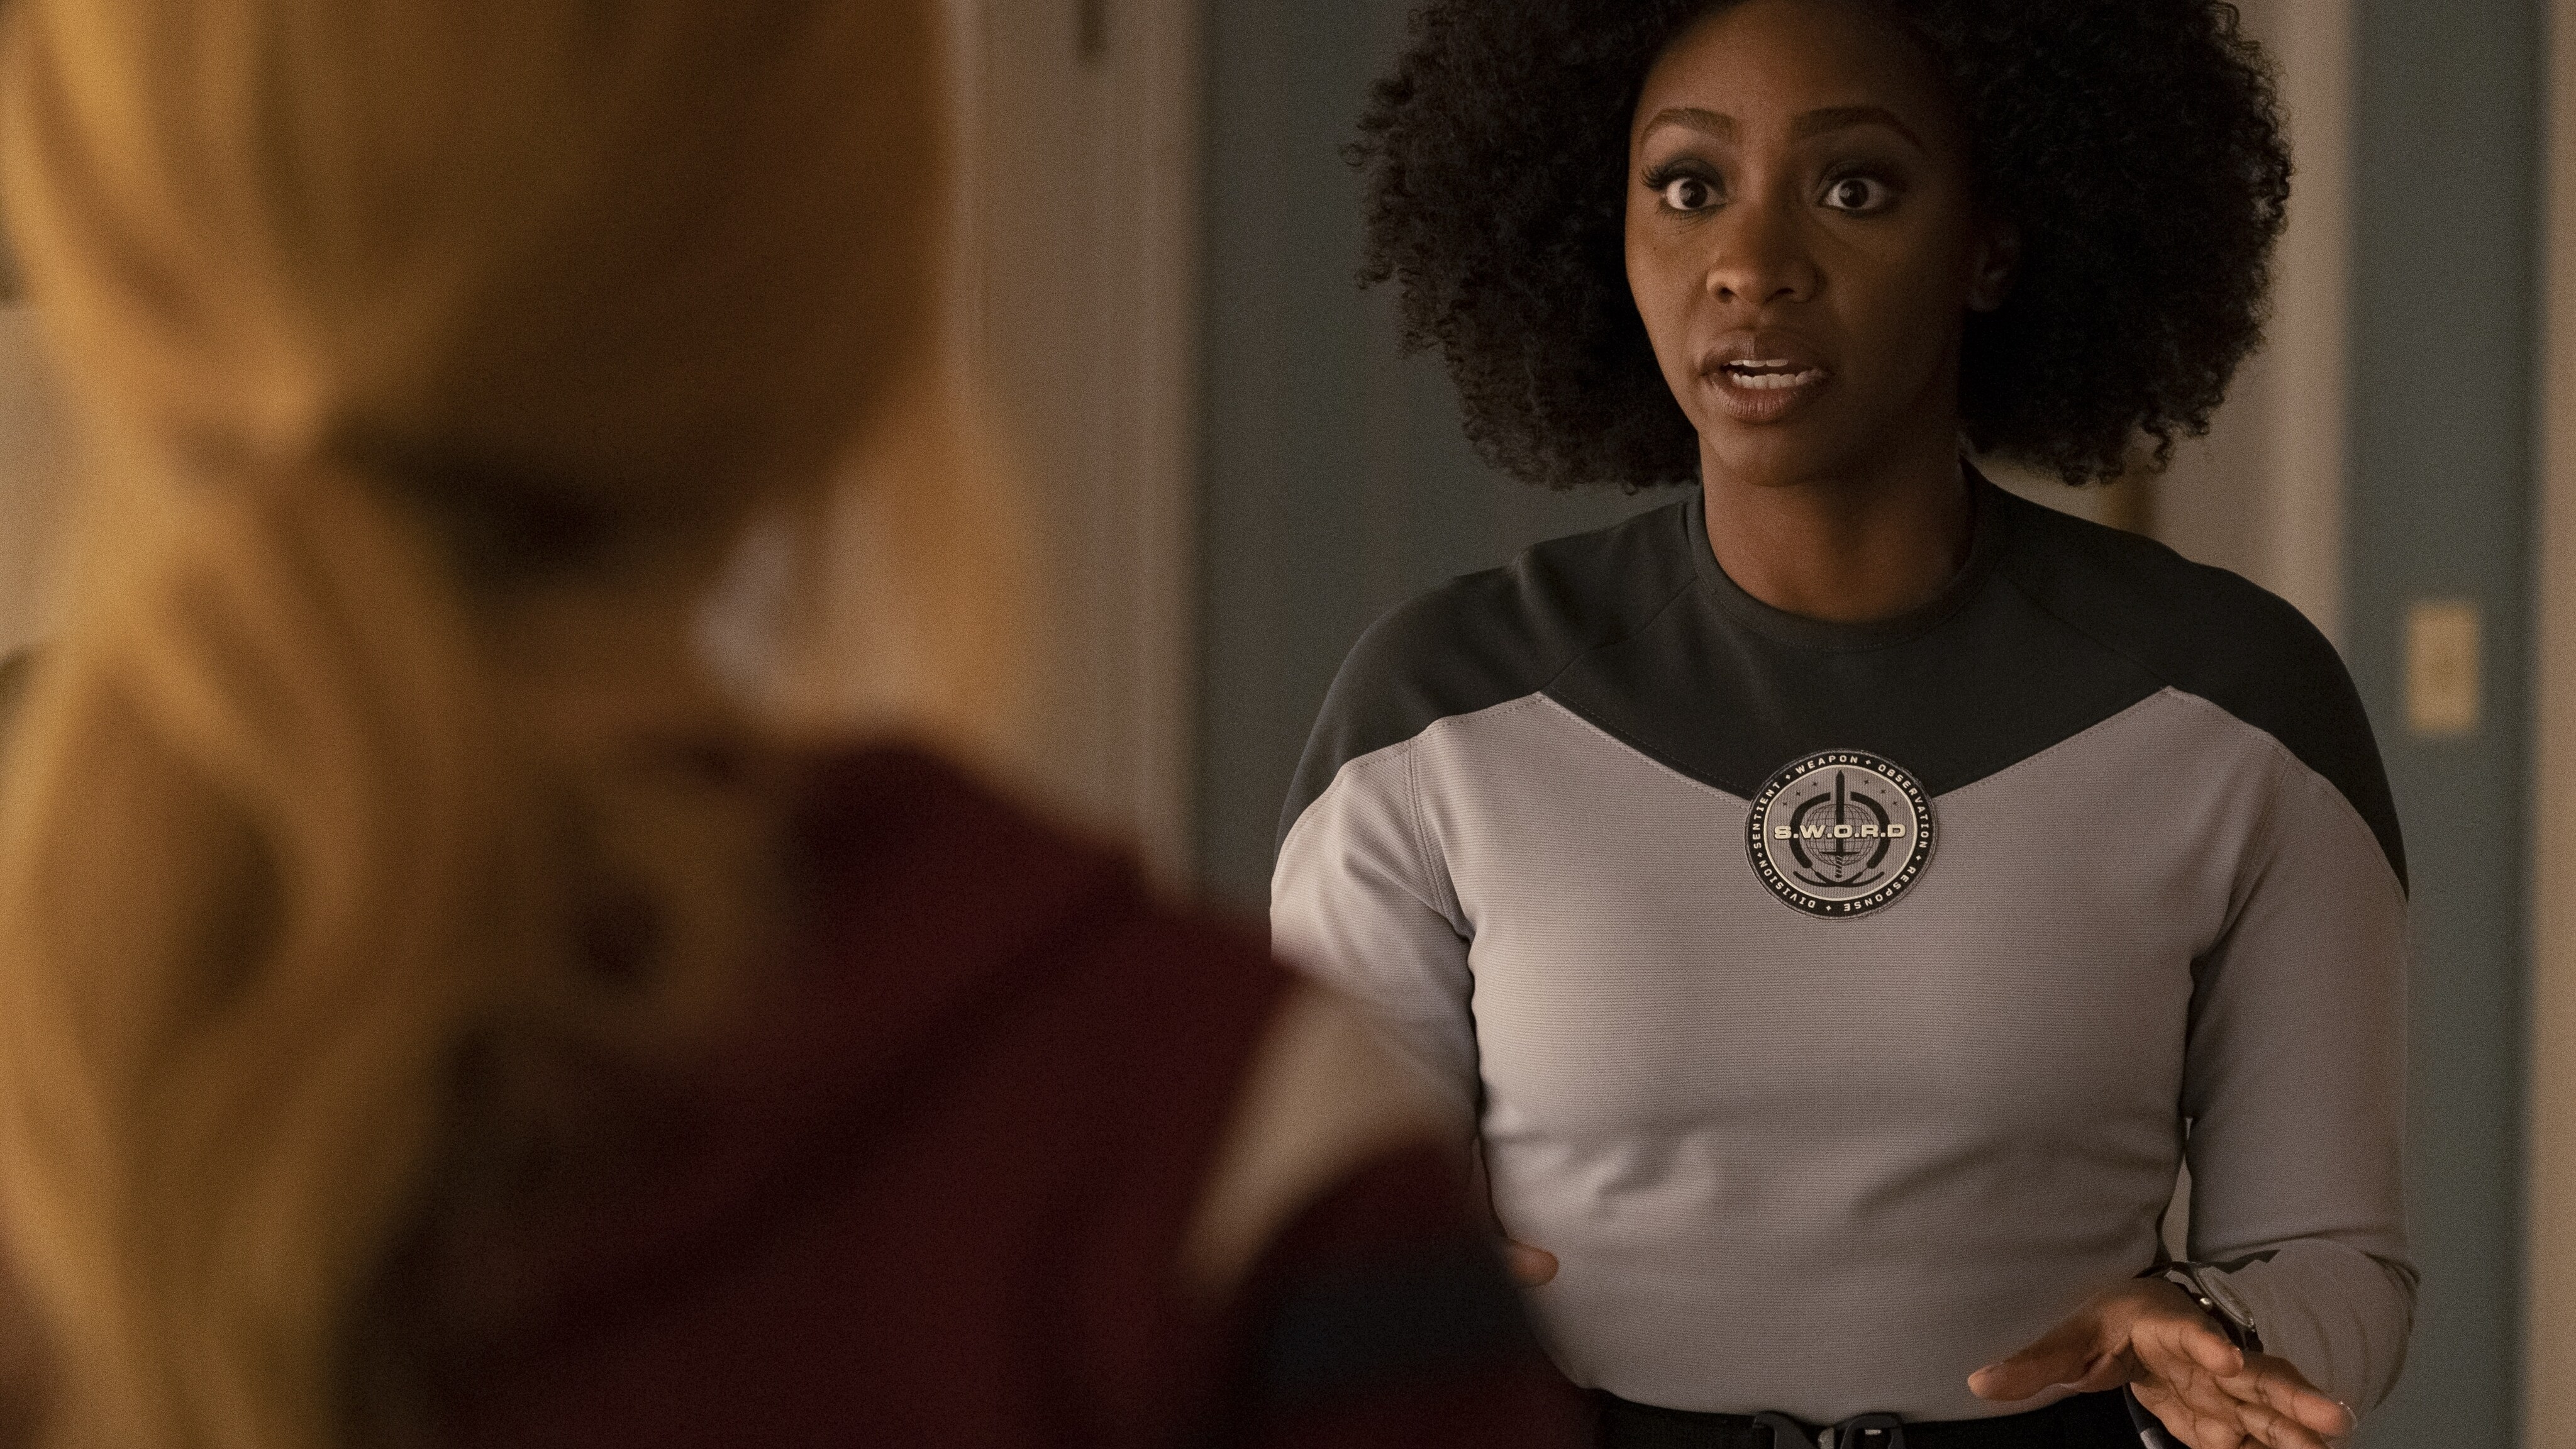 (L-R): Elizabeth Olsen as Wanda Maximoff and Teyonah Parris as Monica Rambeau in Marvel Studios' WANDAVISION exclusively on Disney+. Photo by Chuck Zlotnick. ©Marvel Studios 2021. All Rights Reserved.